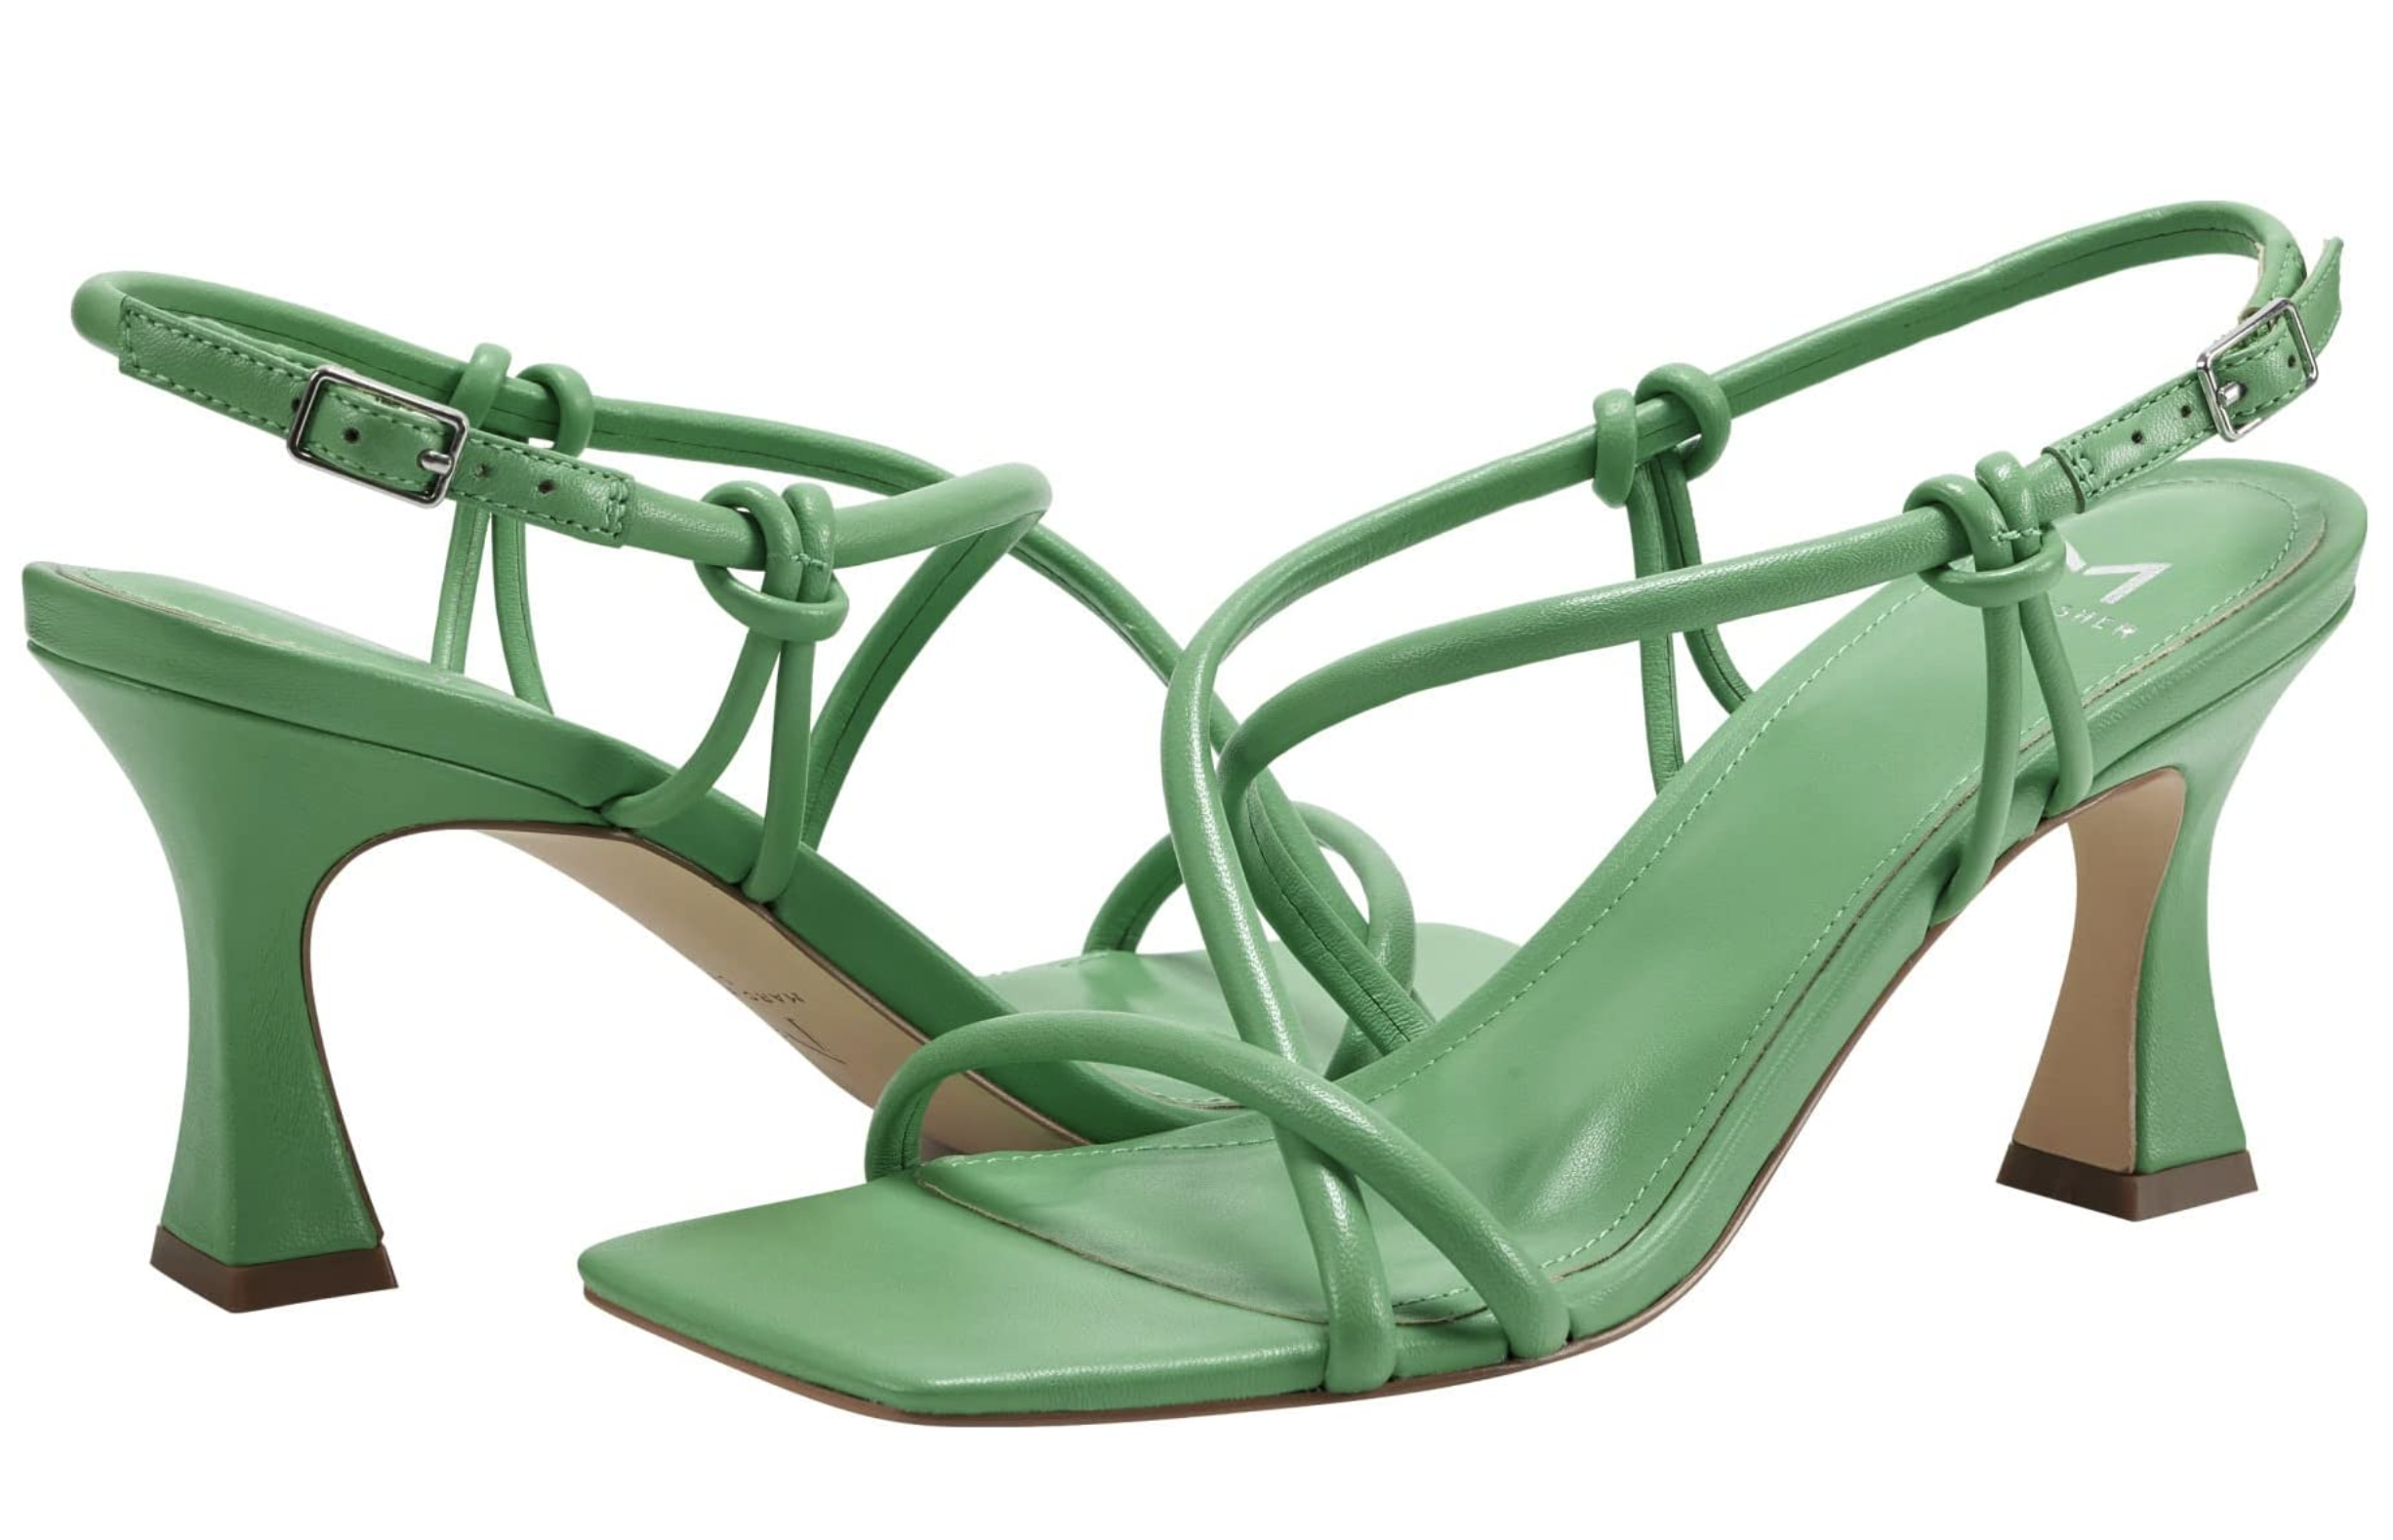 2023 spring trend: bright colored sandals